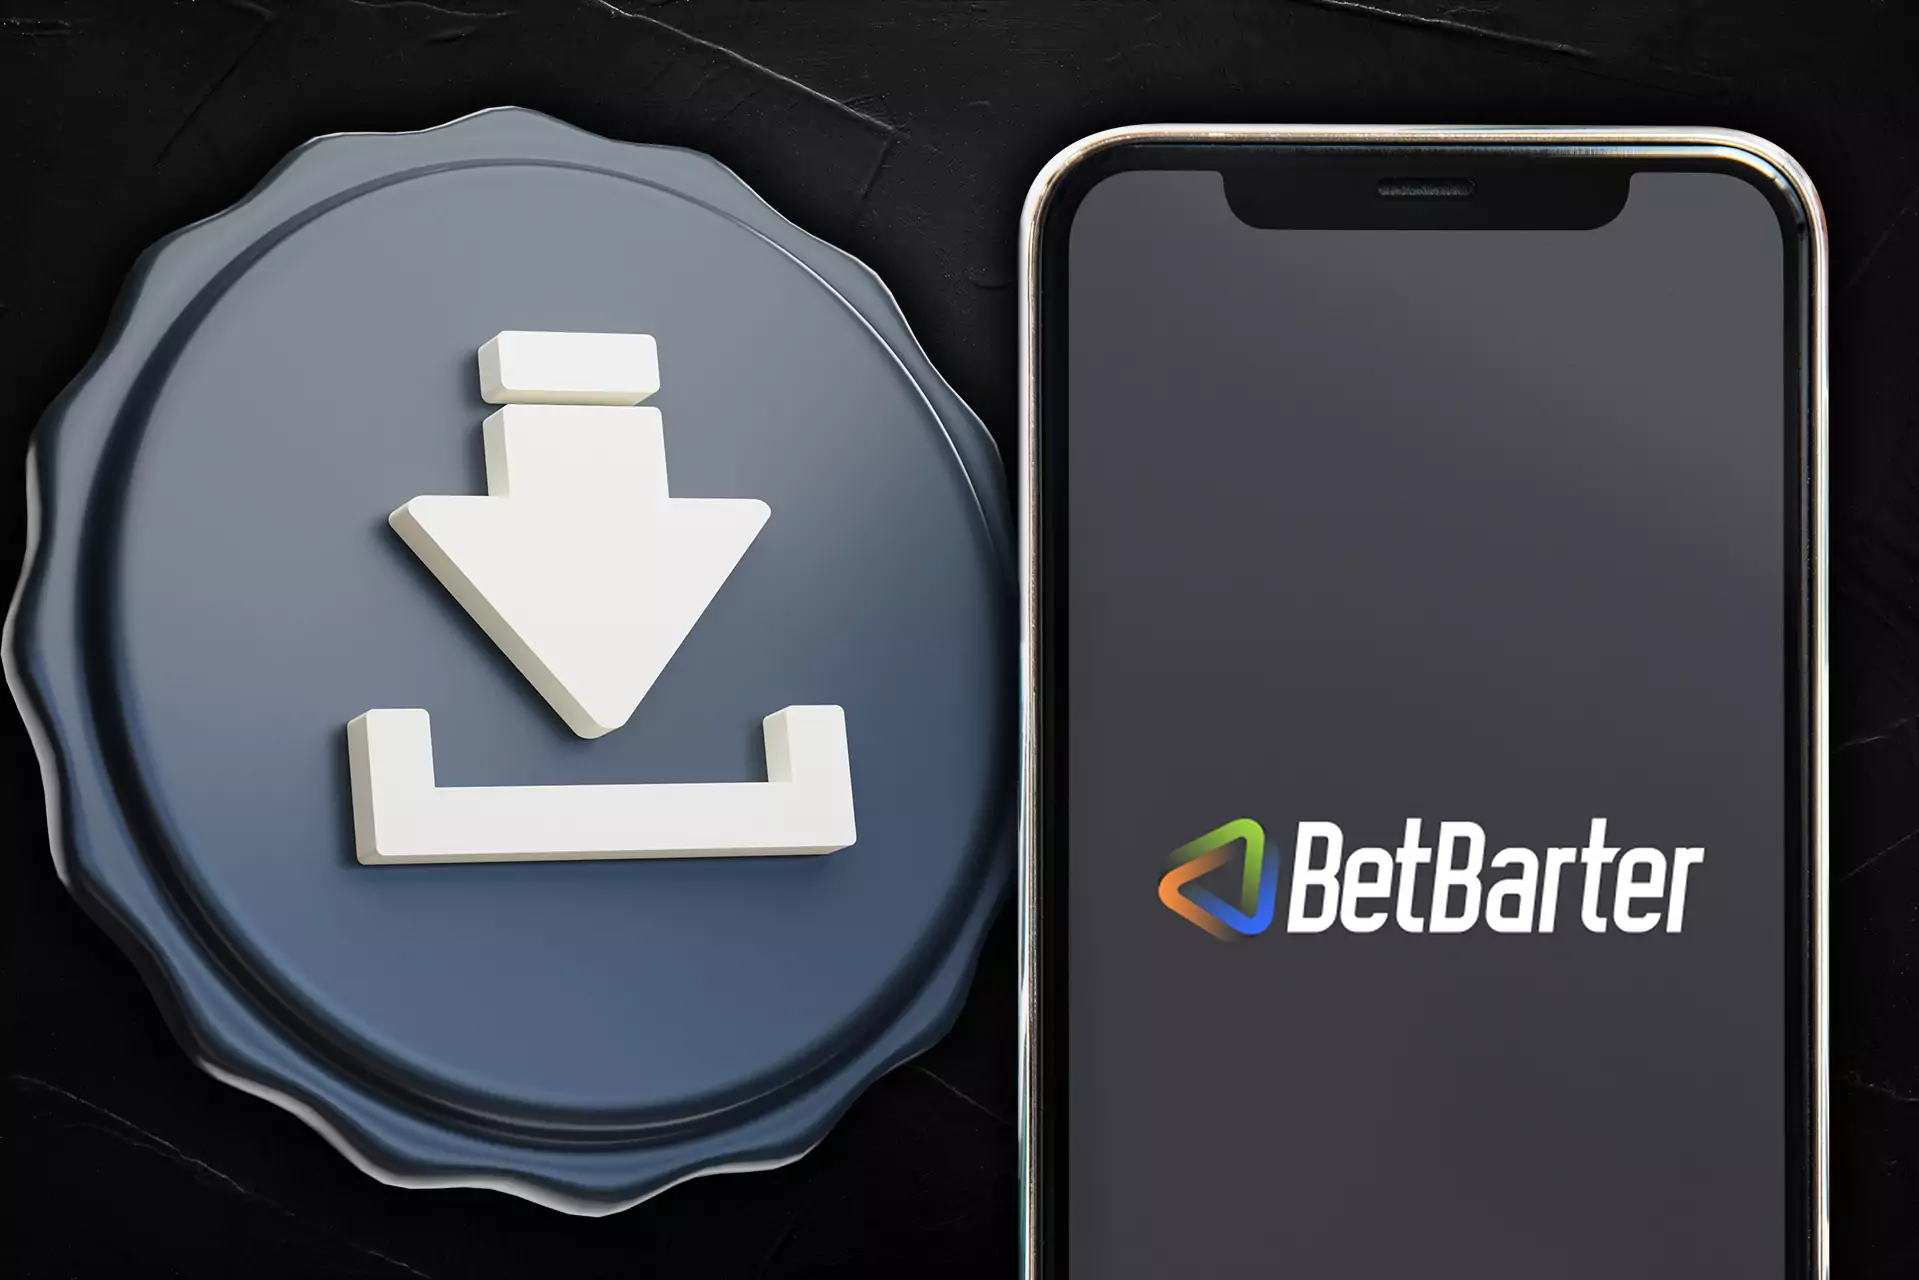 It takes a few minutes to install the Betbarter app.